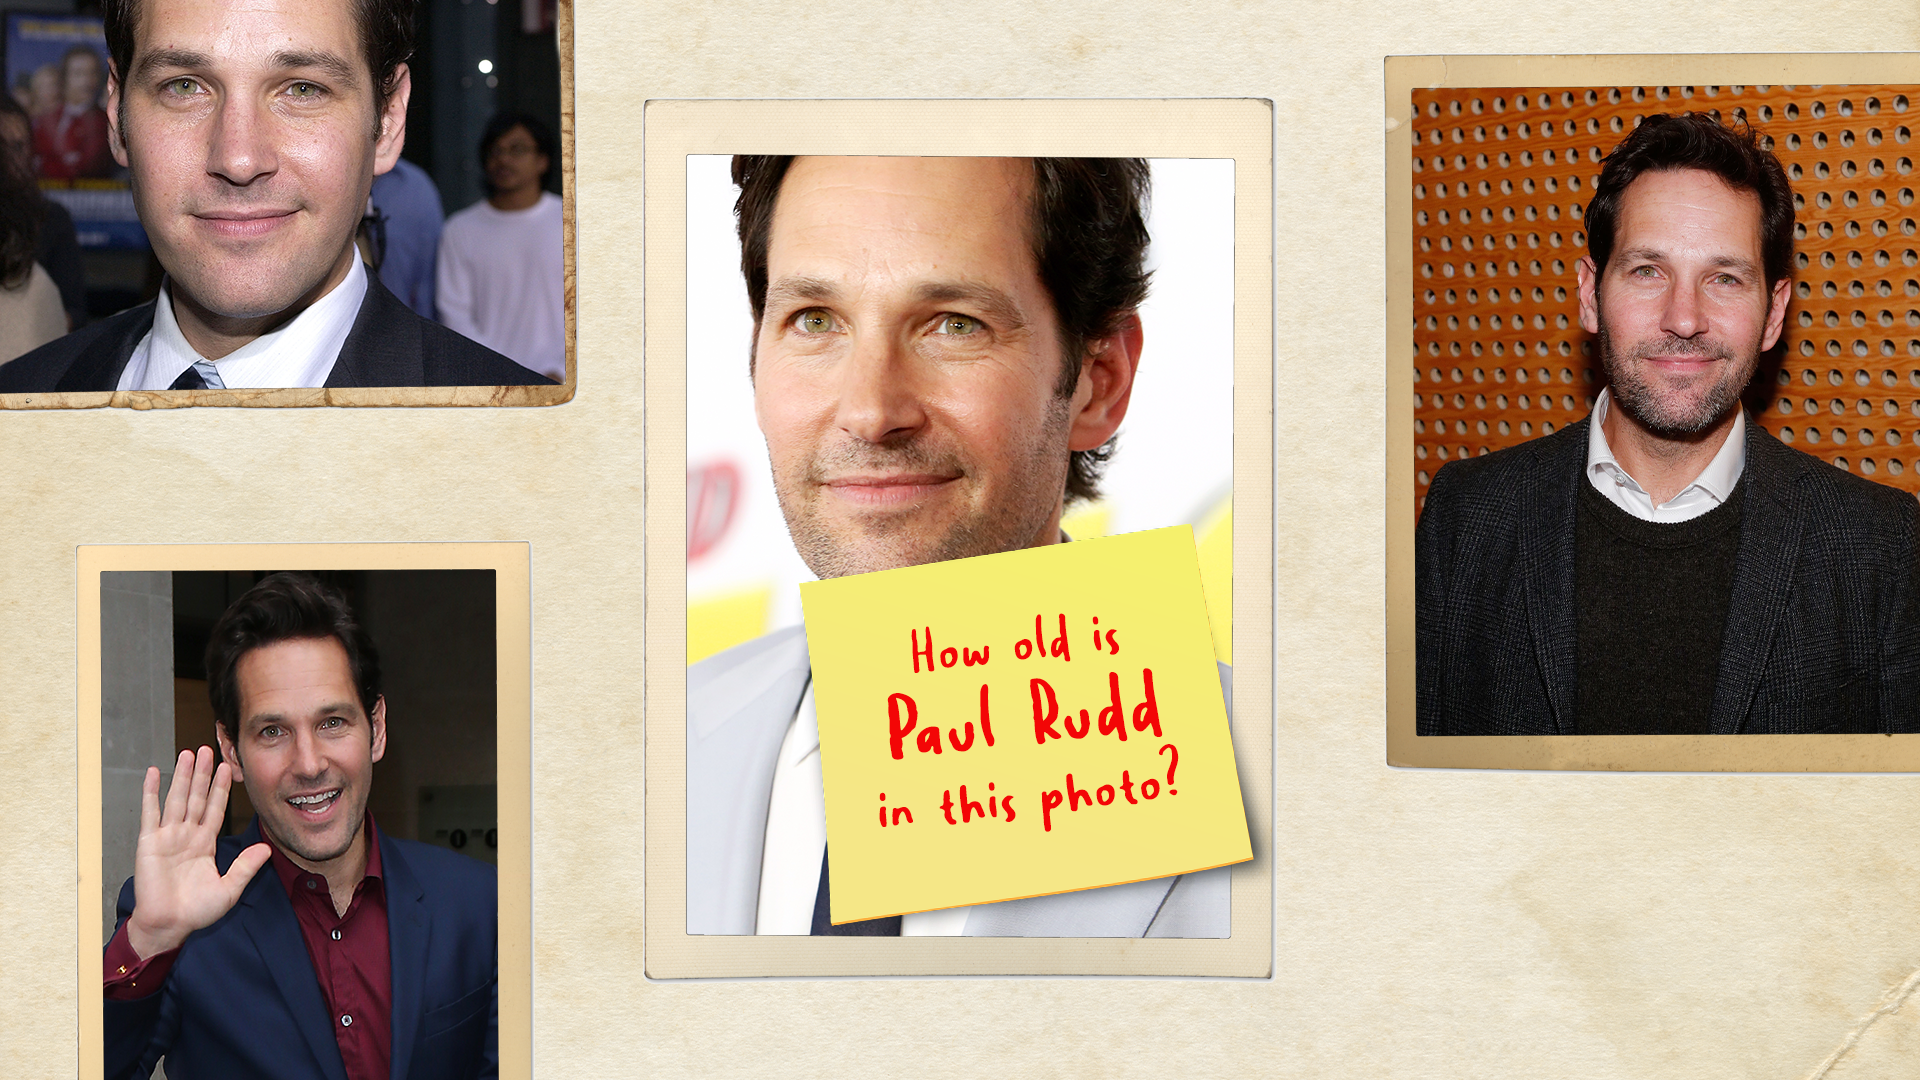 QUIZ: How Old Is Paul Rudd In This Photo?